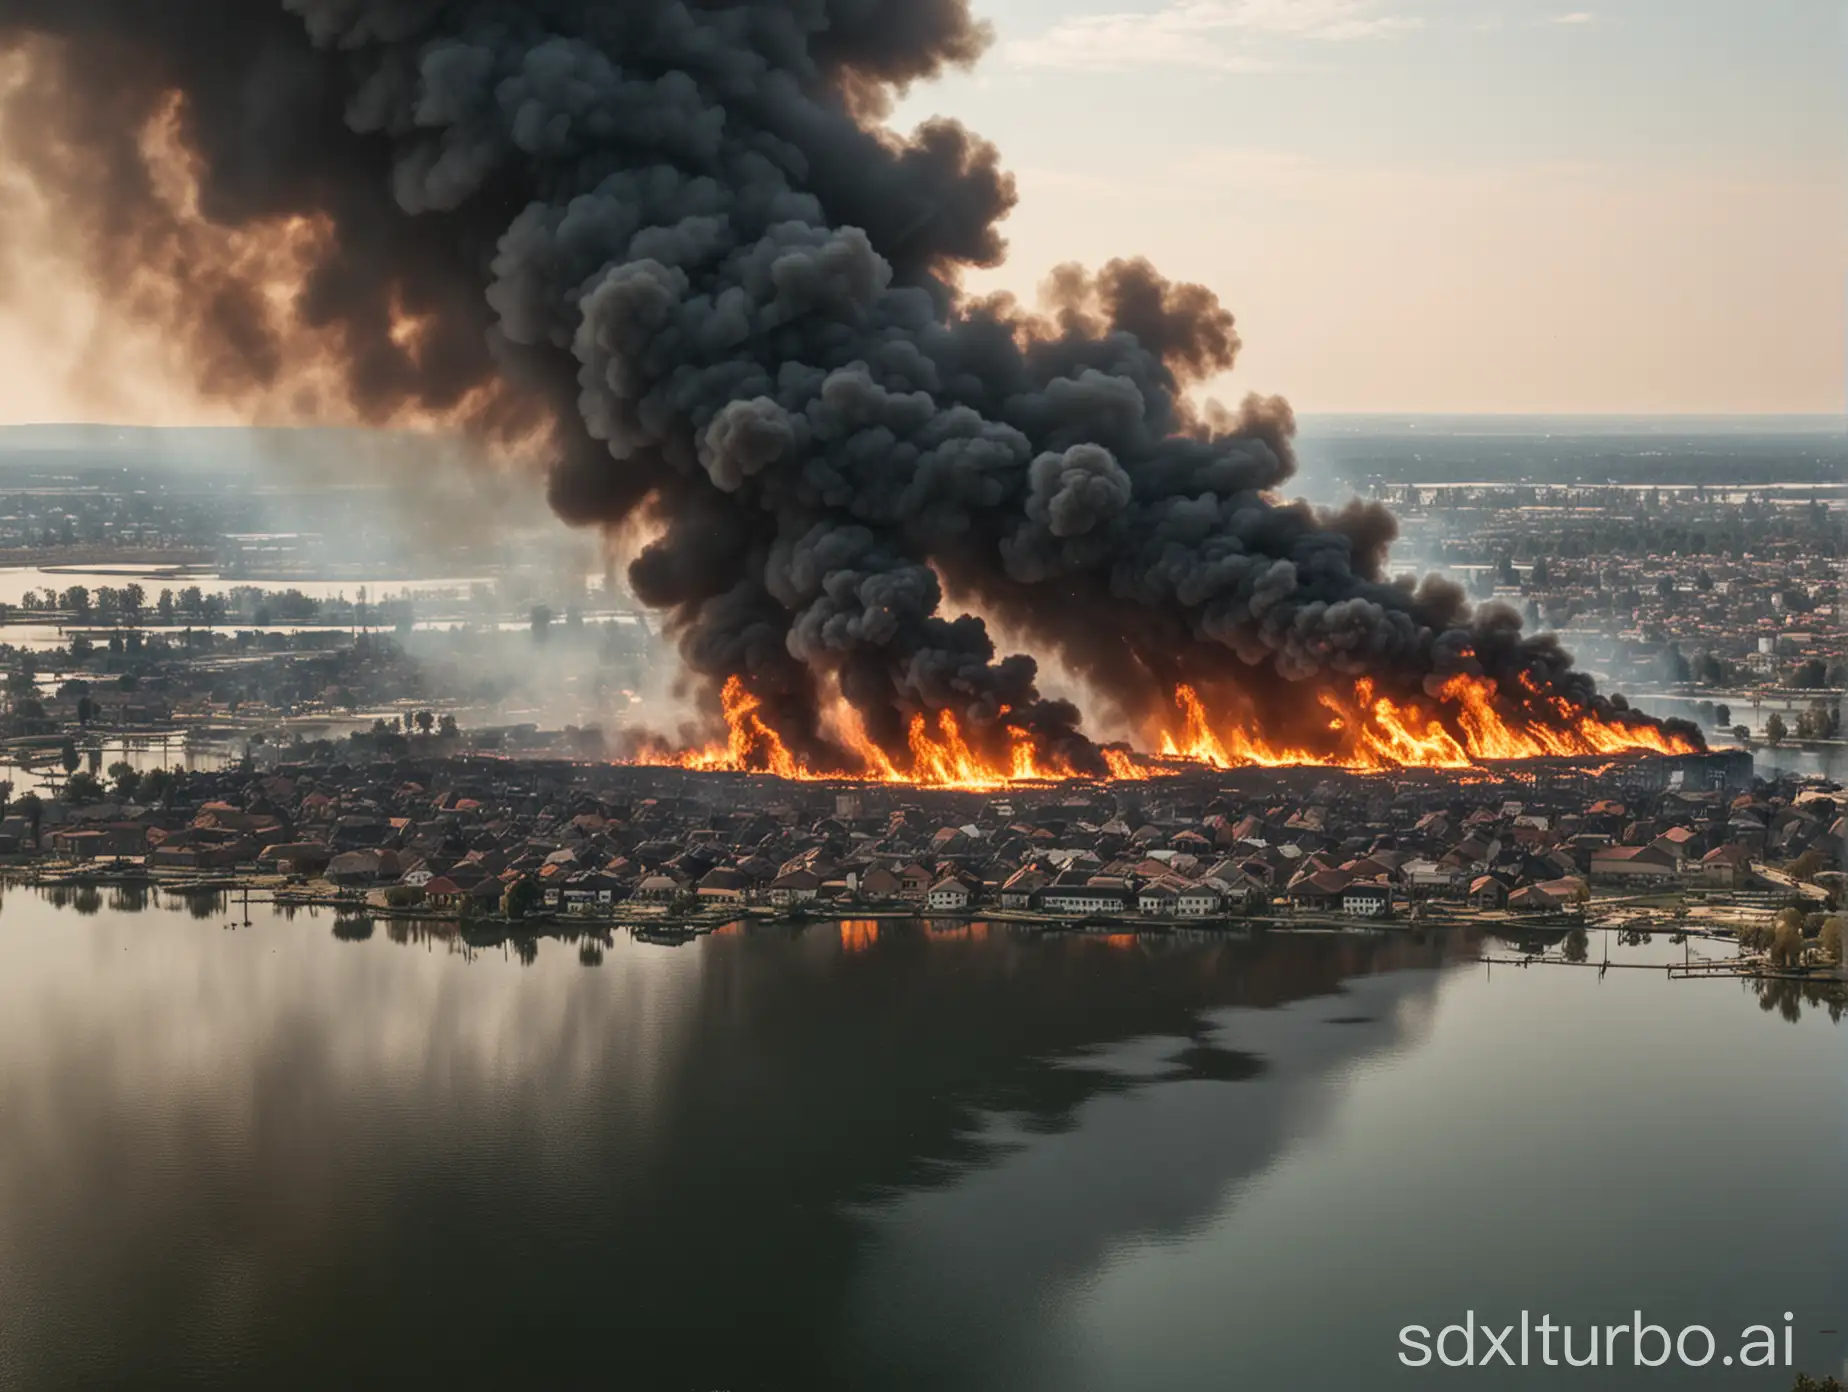 an entire city engulfed in flames from across a small lake during the day, black smoke, no people, close up of fire